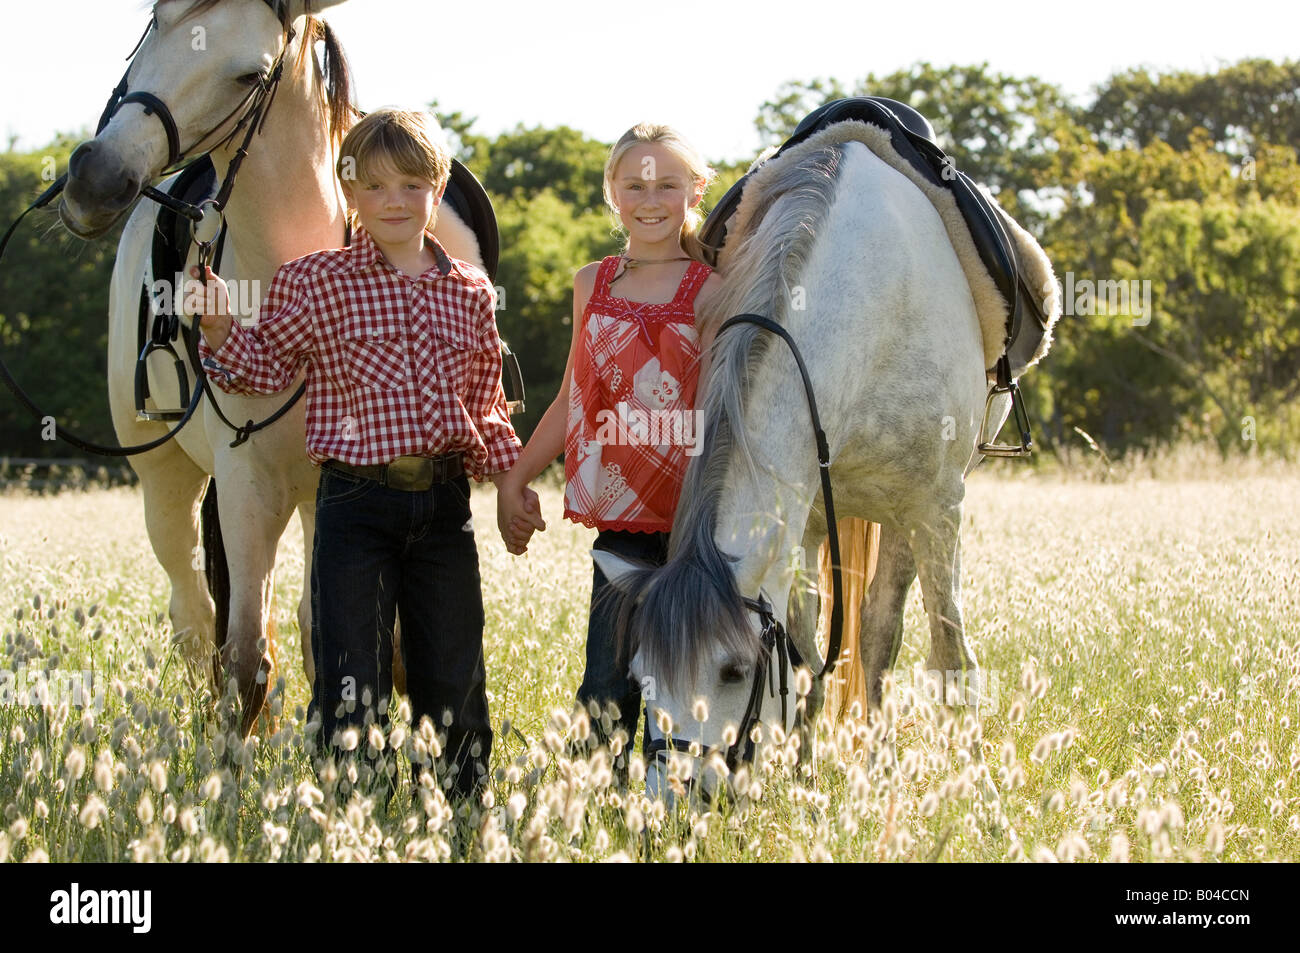 A boy and girl with horses Stock Photo